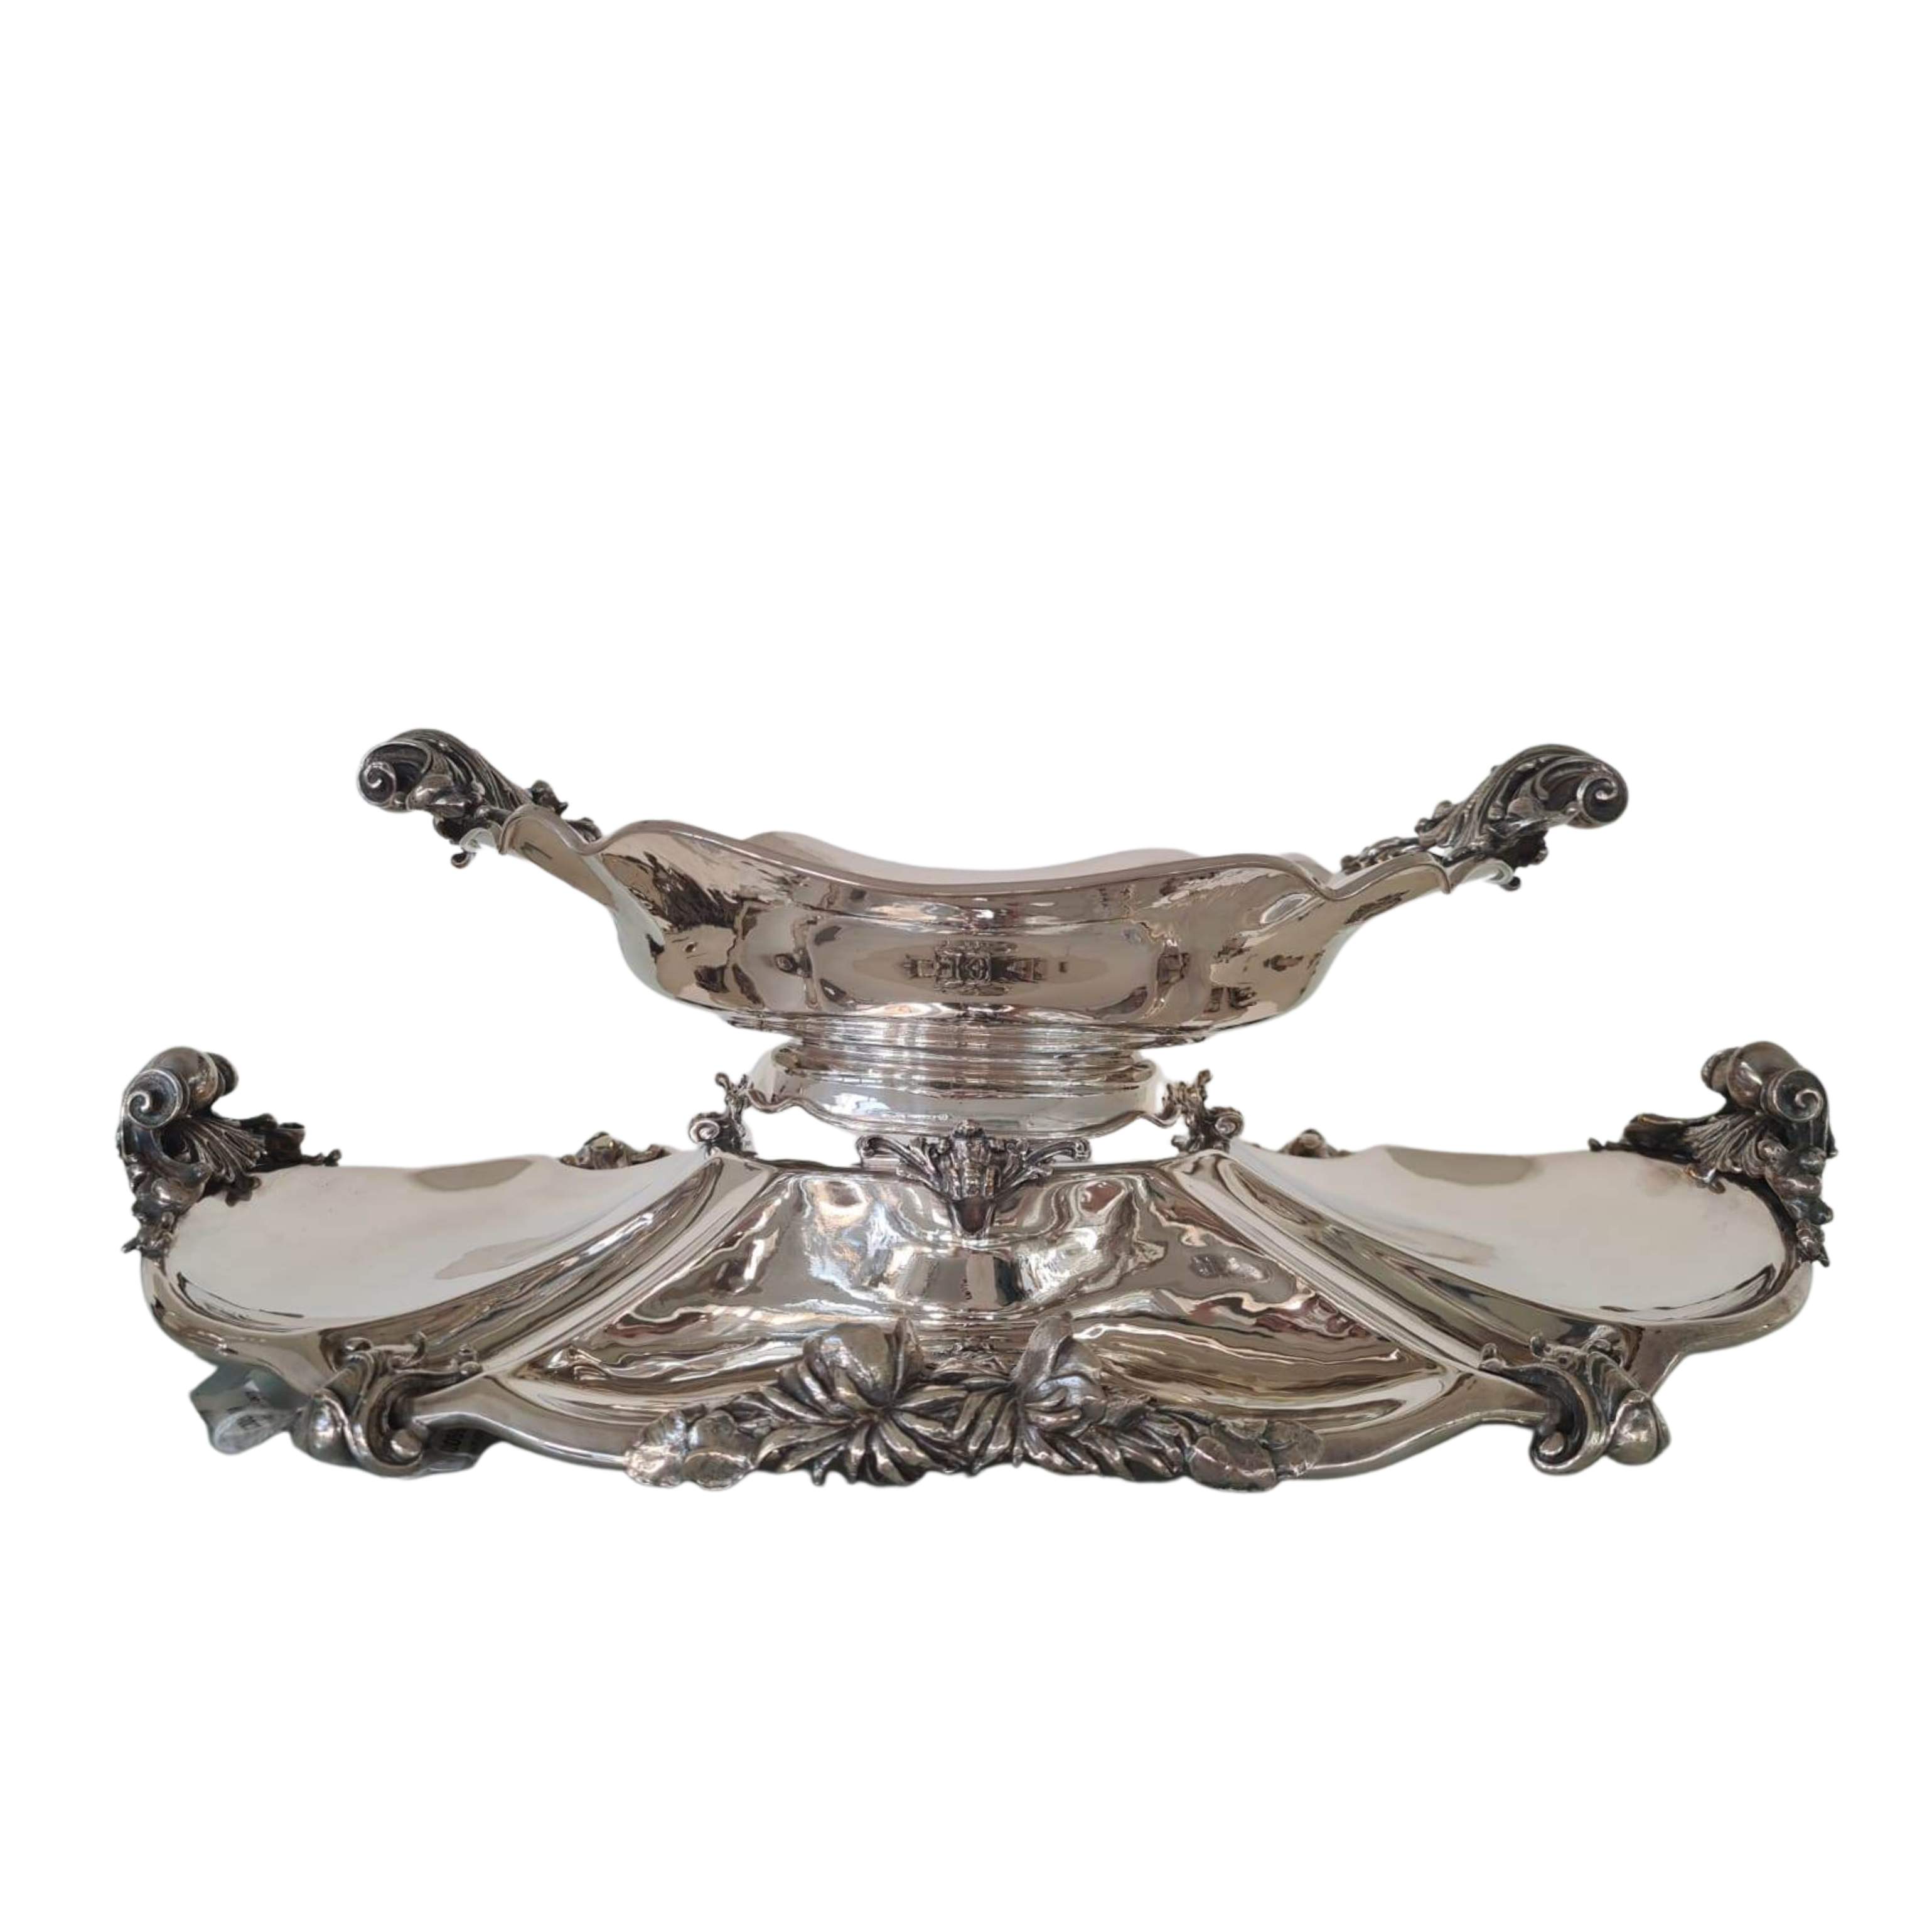 Decorative centerpiece with silver plated parterre, handmade